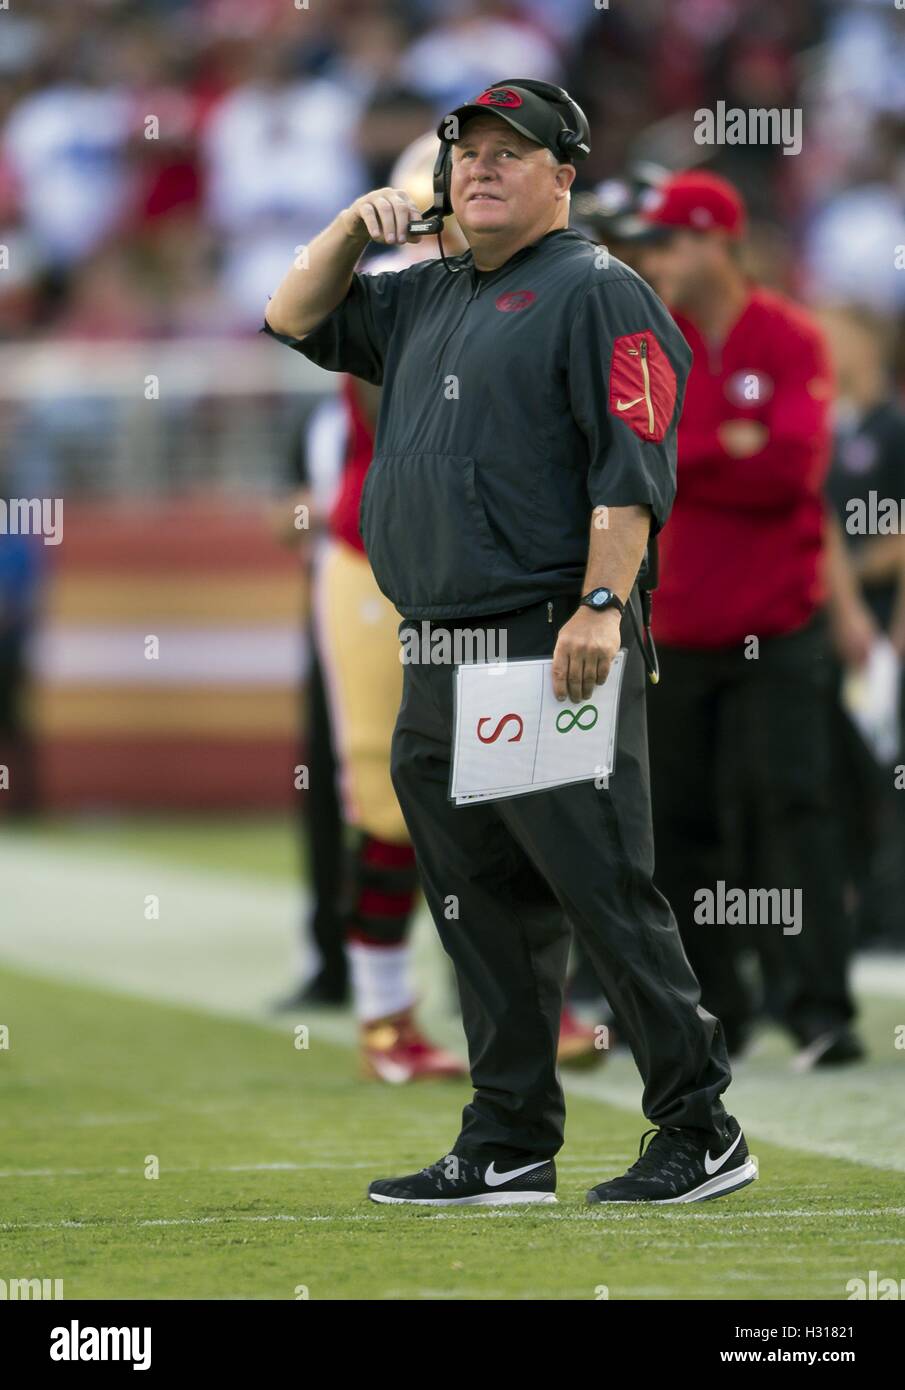 Santa Clara, California, USA. 2nd Oct, 2016. San Francisco 49ers head coach Chip Kelly looks at scoreboard after the last drive against the Dallas Cowboys in the fourth quarter during a game at Levi's Stadium on Sunday October 2, 2016 in Santa Clara, Calif. © Paul Kitagaki Jr/Sacramento Bee/ZUMA Wire/Alamy Live News Stock Photo